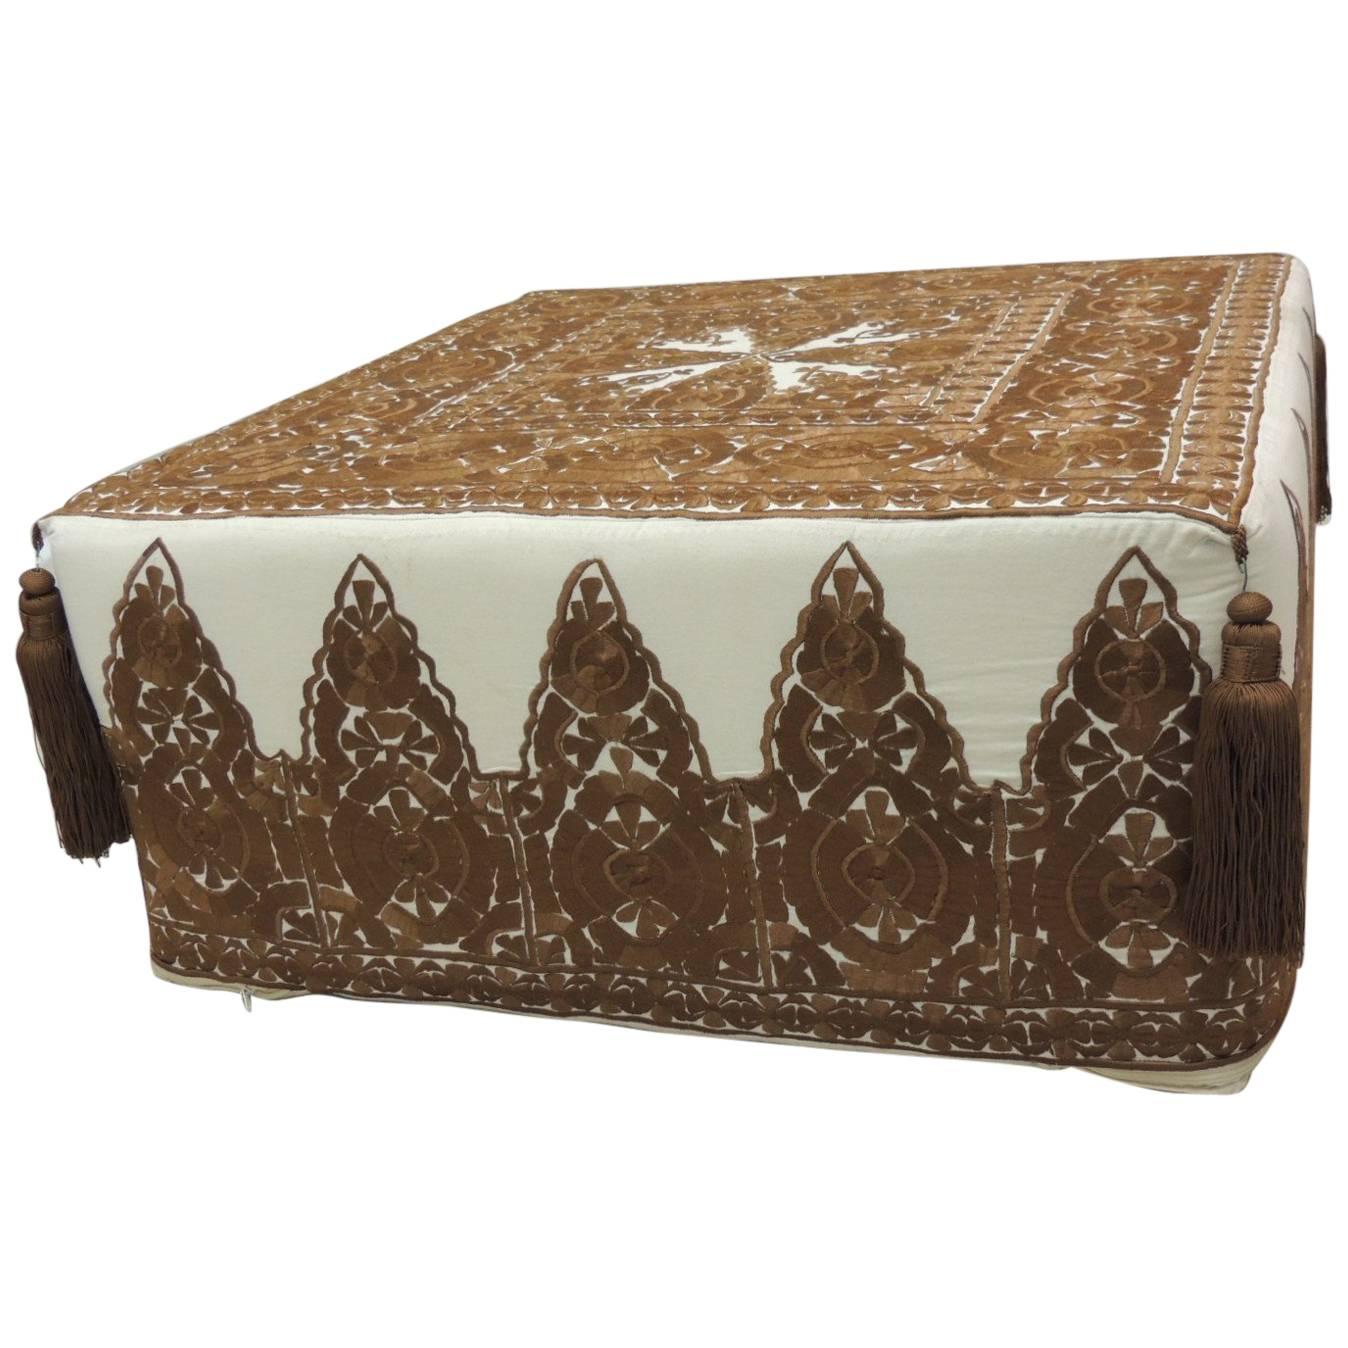 Offered by the Antique Textiles Galleries:
Modern Moroccan brown embroidered ottoman with tassels
Brown modern Moroccan embroidered pouf/ottoman with tassels. Square ottoman textile handmade and embroidered in Morocco. Floss silk threads embroidered